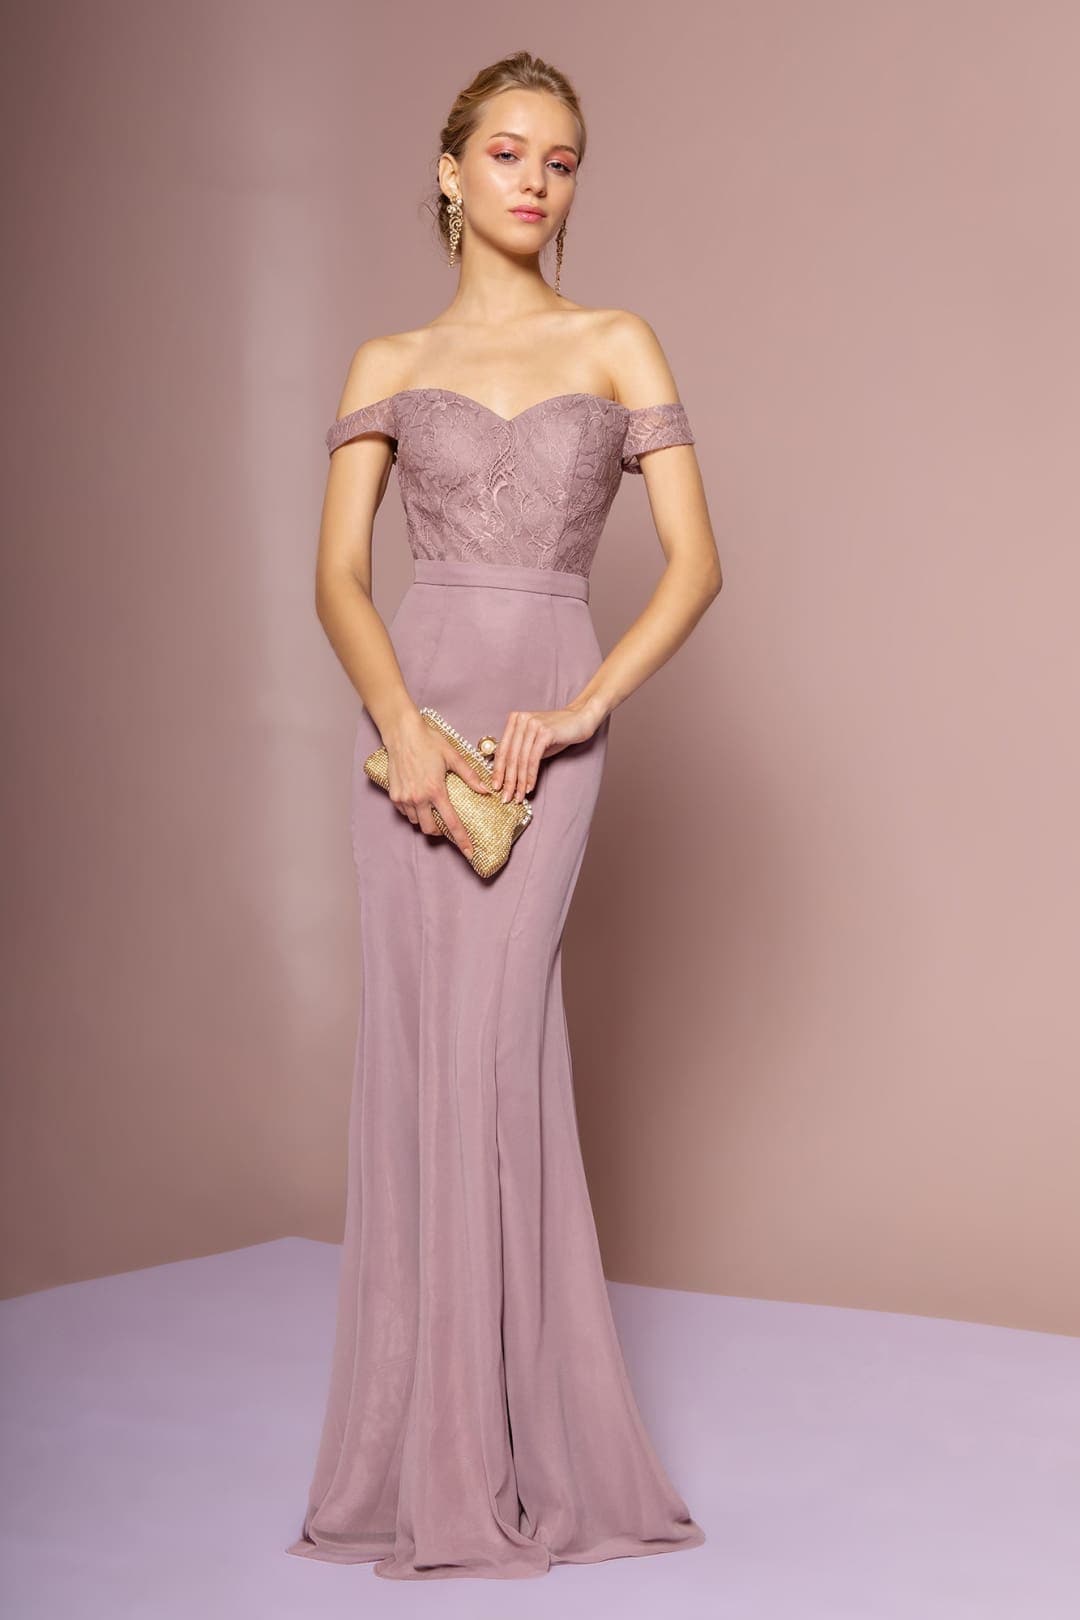 Classy Evening Formal Gown - MAUVE / XS